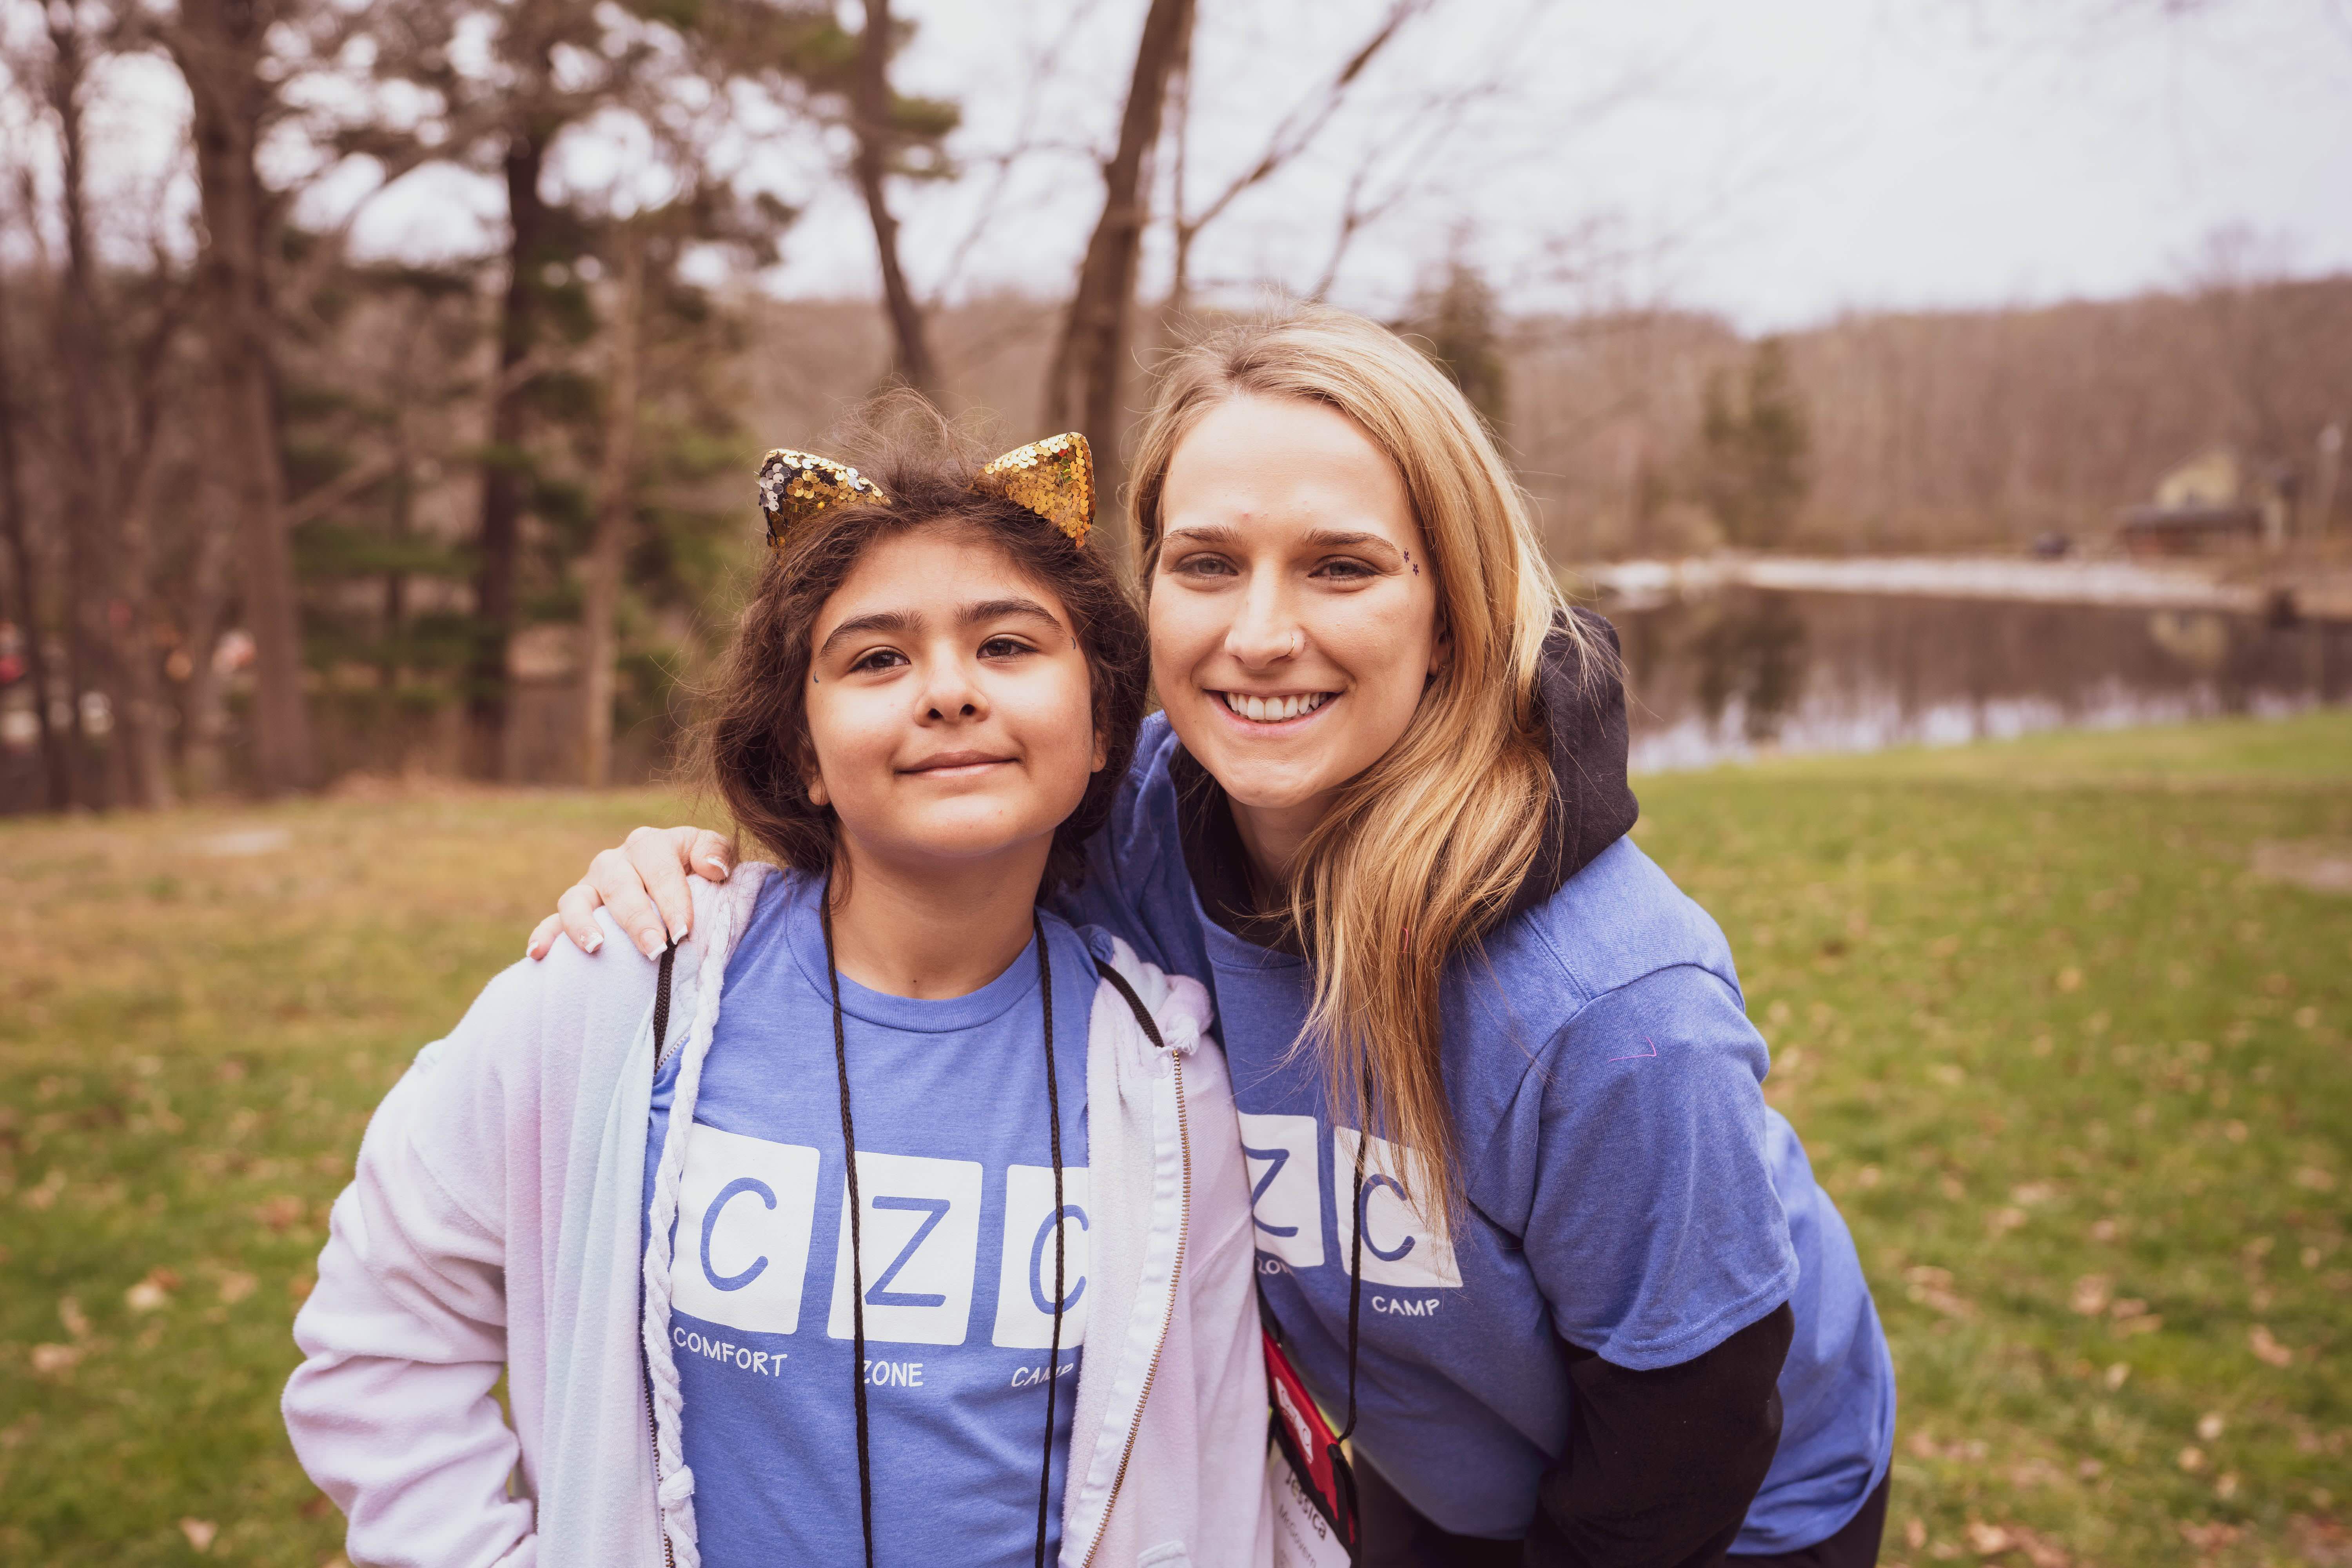 Big Buddy volunteer Jessica and her Little Buddy Vicky exemplify the benefits of Comfort Zone Camp, which helps grieving kids find healing and community. Image courtesy of CZC